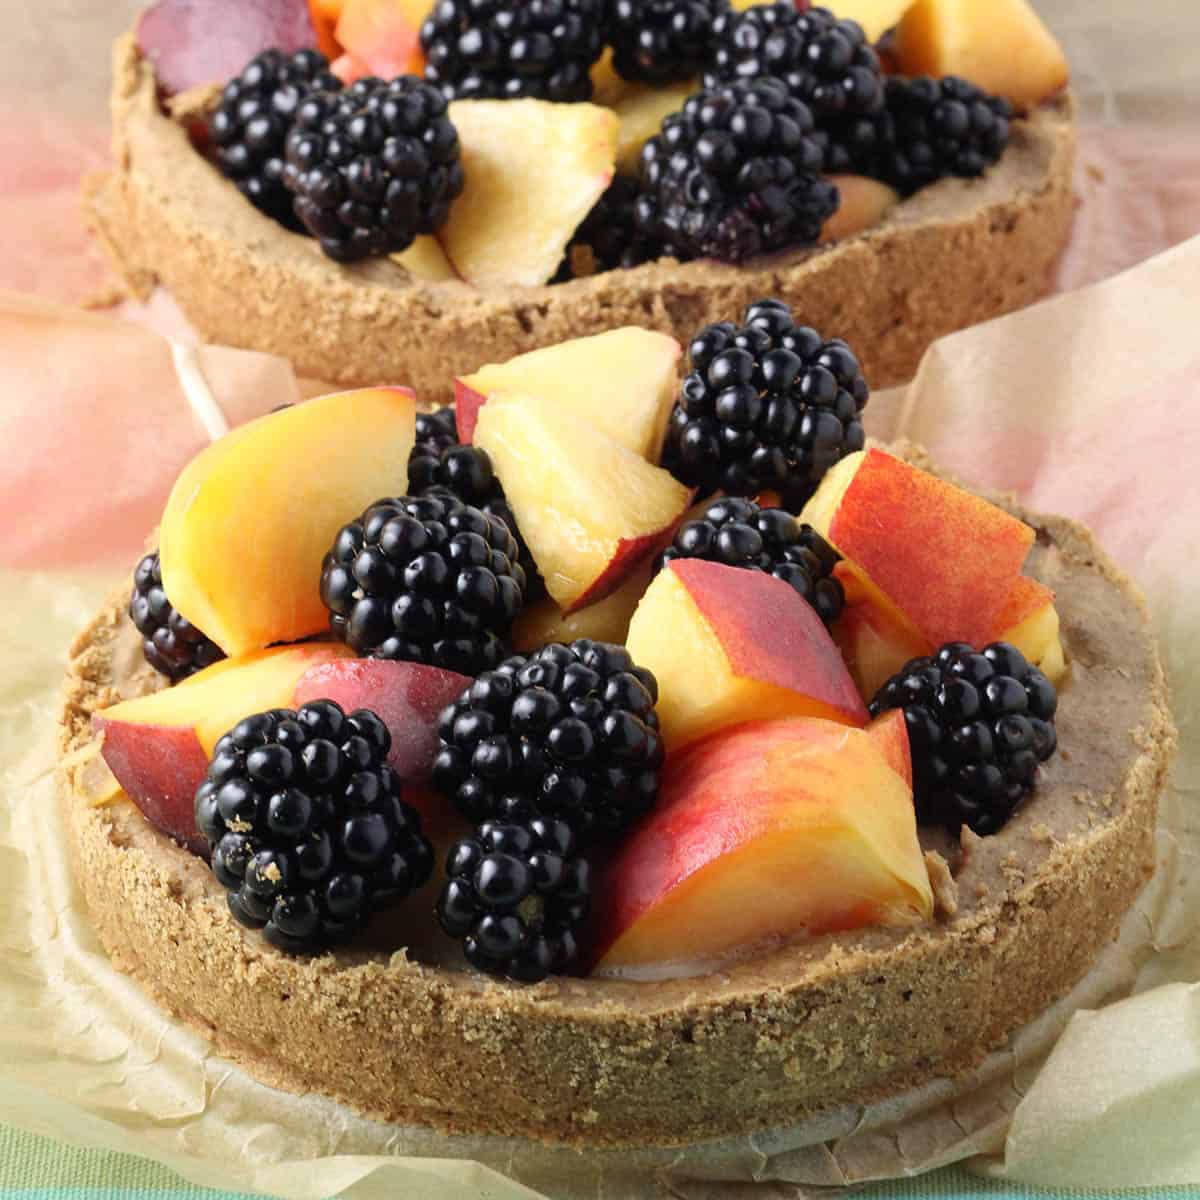 two small tarts filled with peaches and blackberries, one in front and one behind